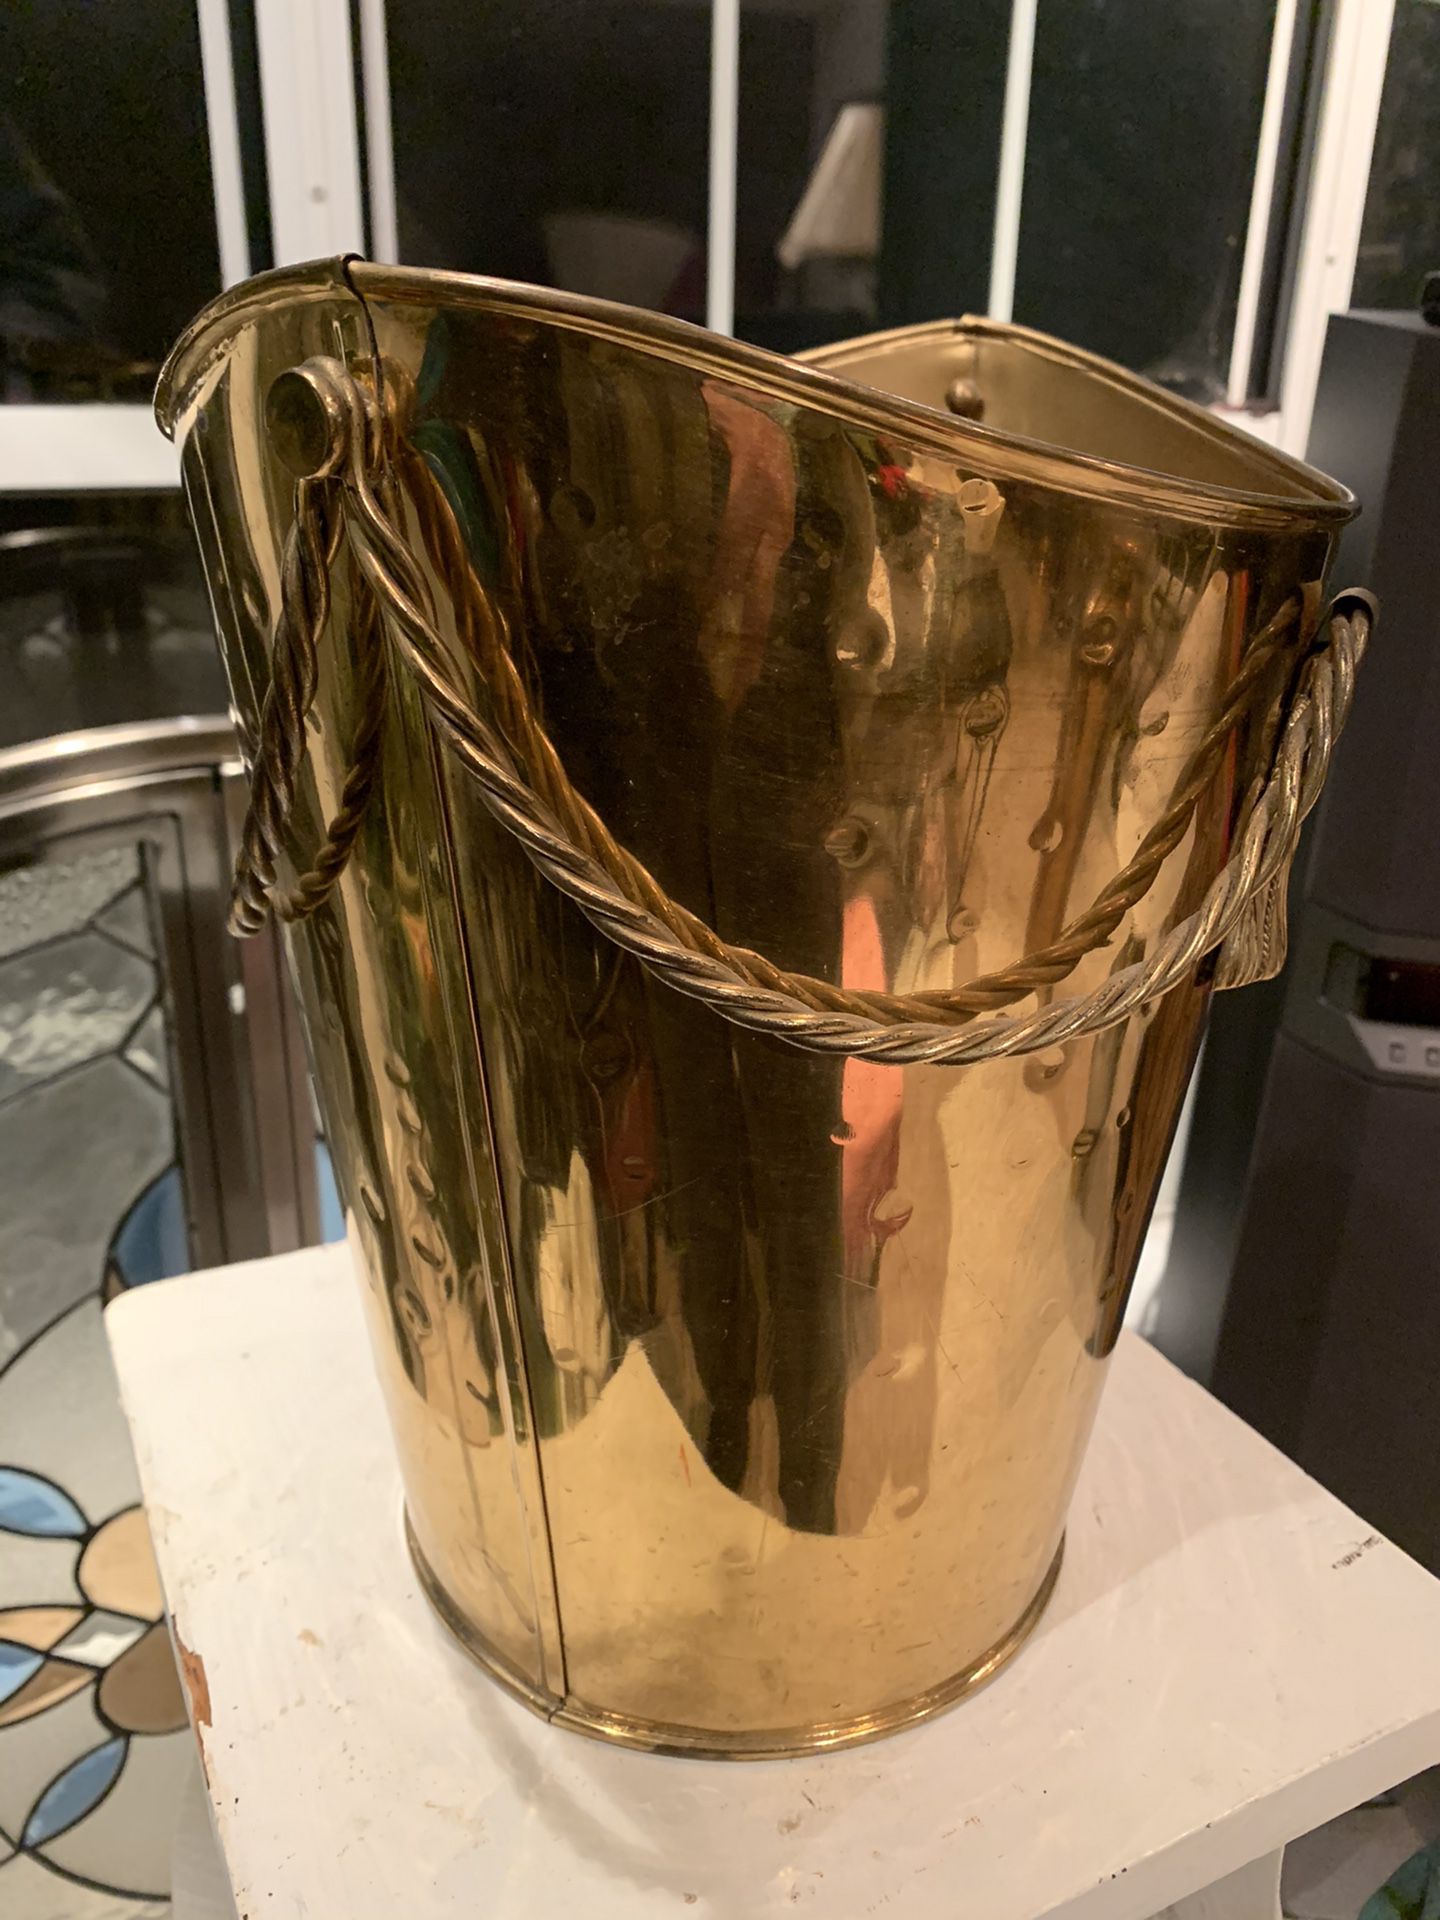 Brass decorative roped detailed bucket for plant/ trash can etc.